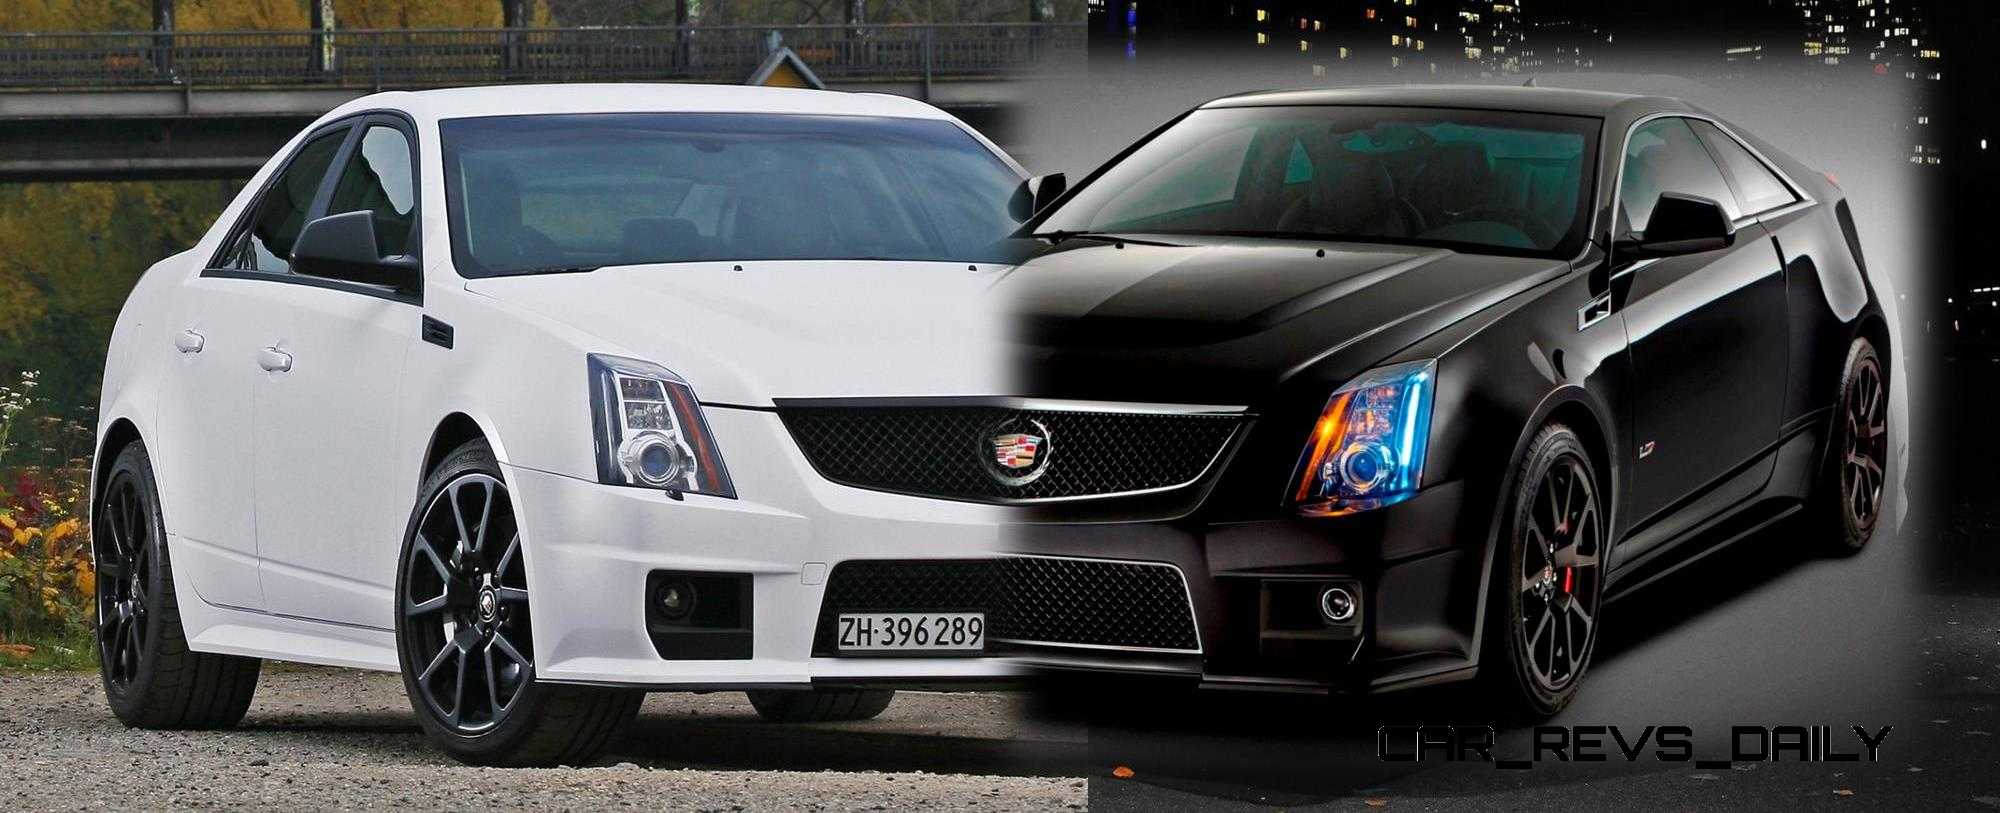 2012 Cadillac CTS-V with Satin White Wrap by CAMSHAFT